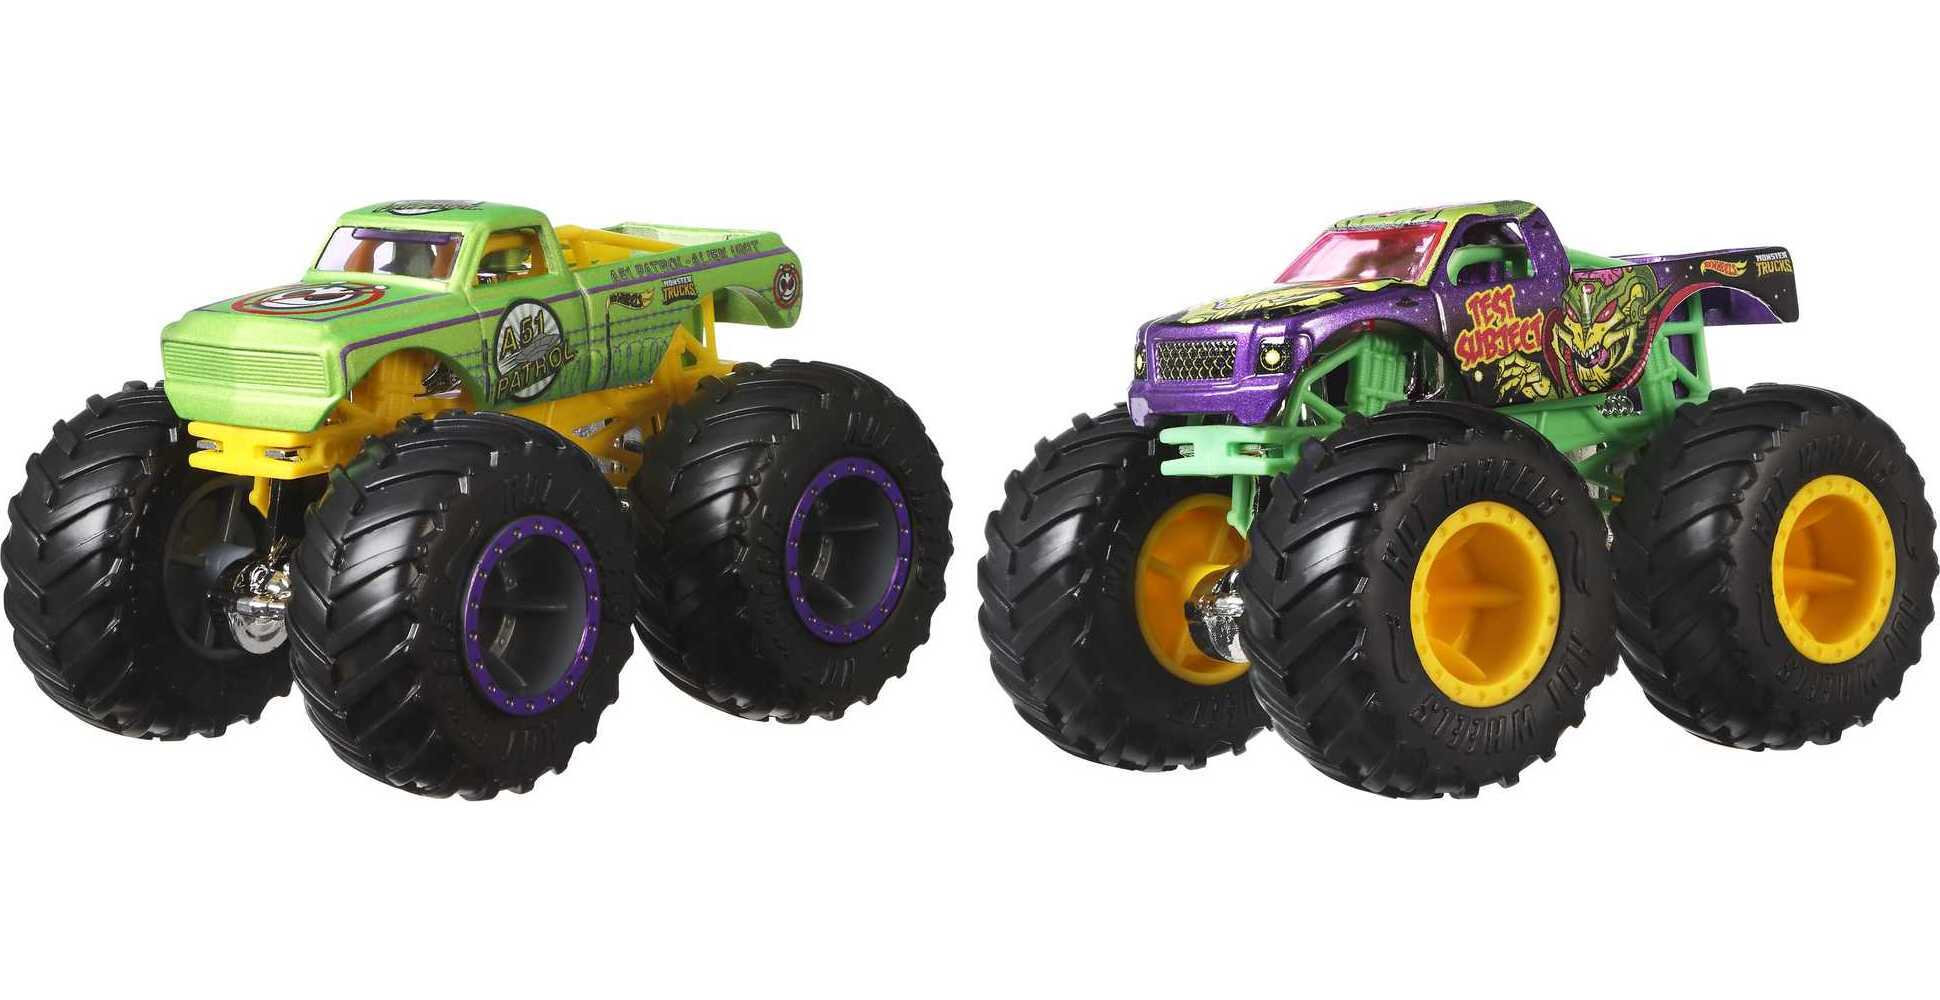 Hot Wheels Monster Trucks Demolition Doubles, Set of 2 Toy Trucks (Styles May Vary) - image 4 of 6